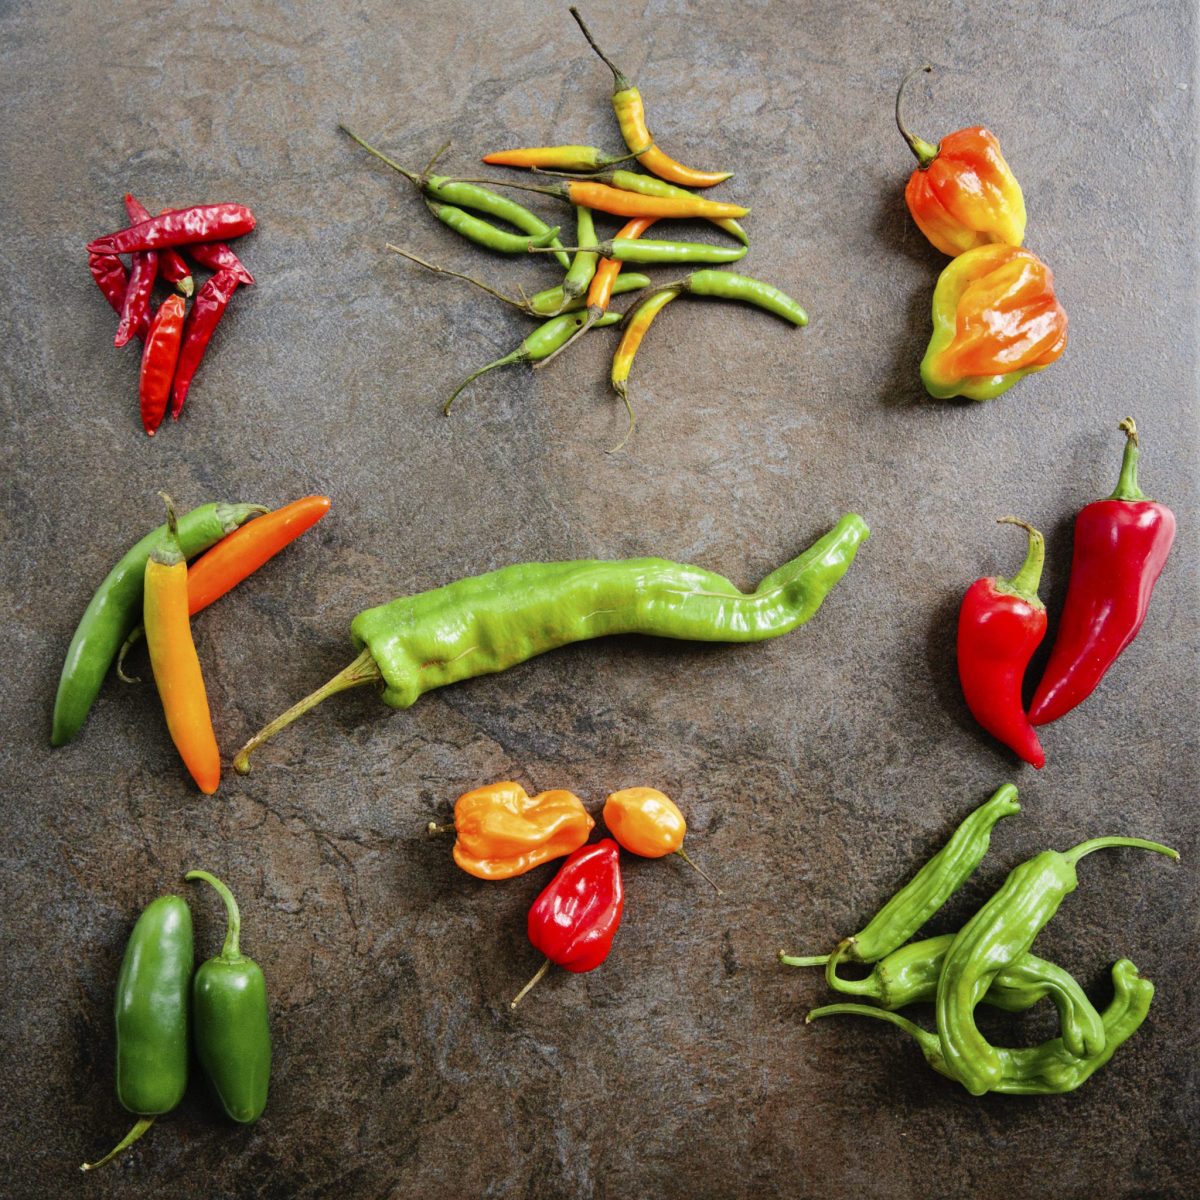 Photograph of a guide of peppers that showcases how many different peppers there are as multiple lay out on concrete